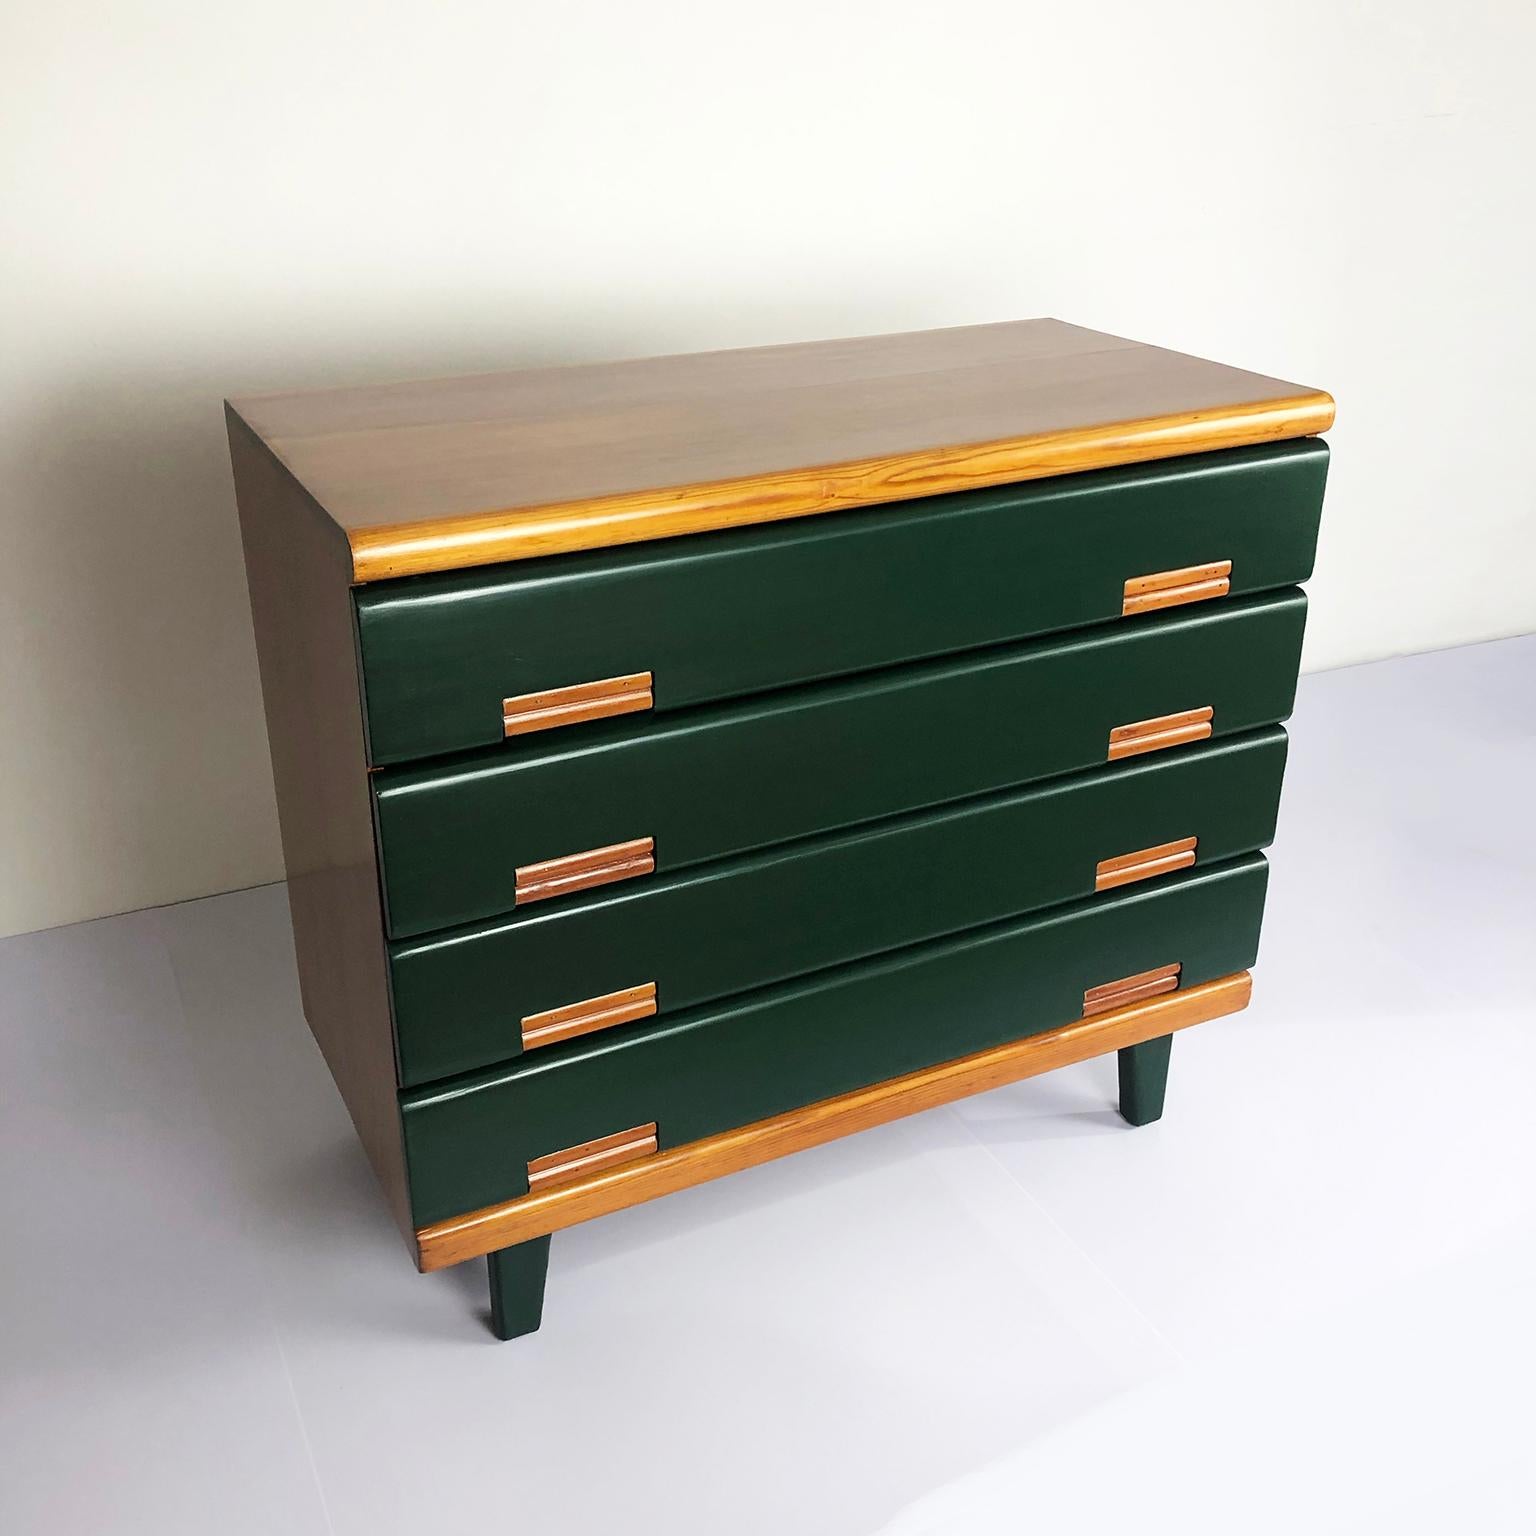 We offer this rare original Domus drawer by Michael Van Beuren in pine wood and with the characteristic green Van Beuren color, designed by the American Bauhaus designer, Michael Van Beuren in Mexico, circa 1950, this handmade, solid pine wood